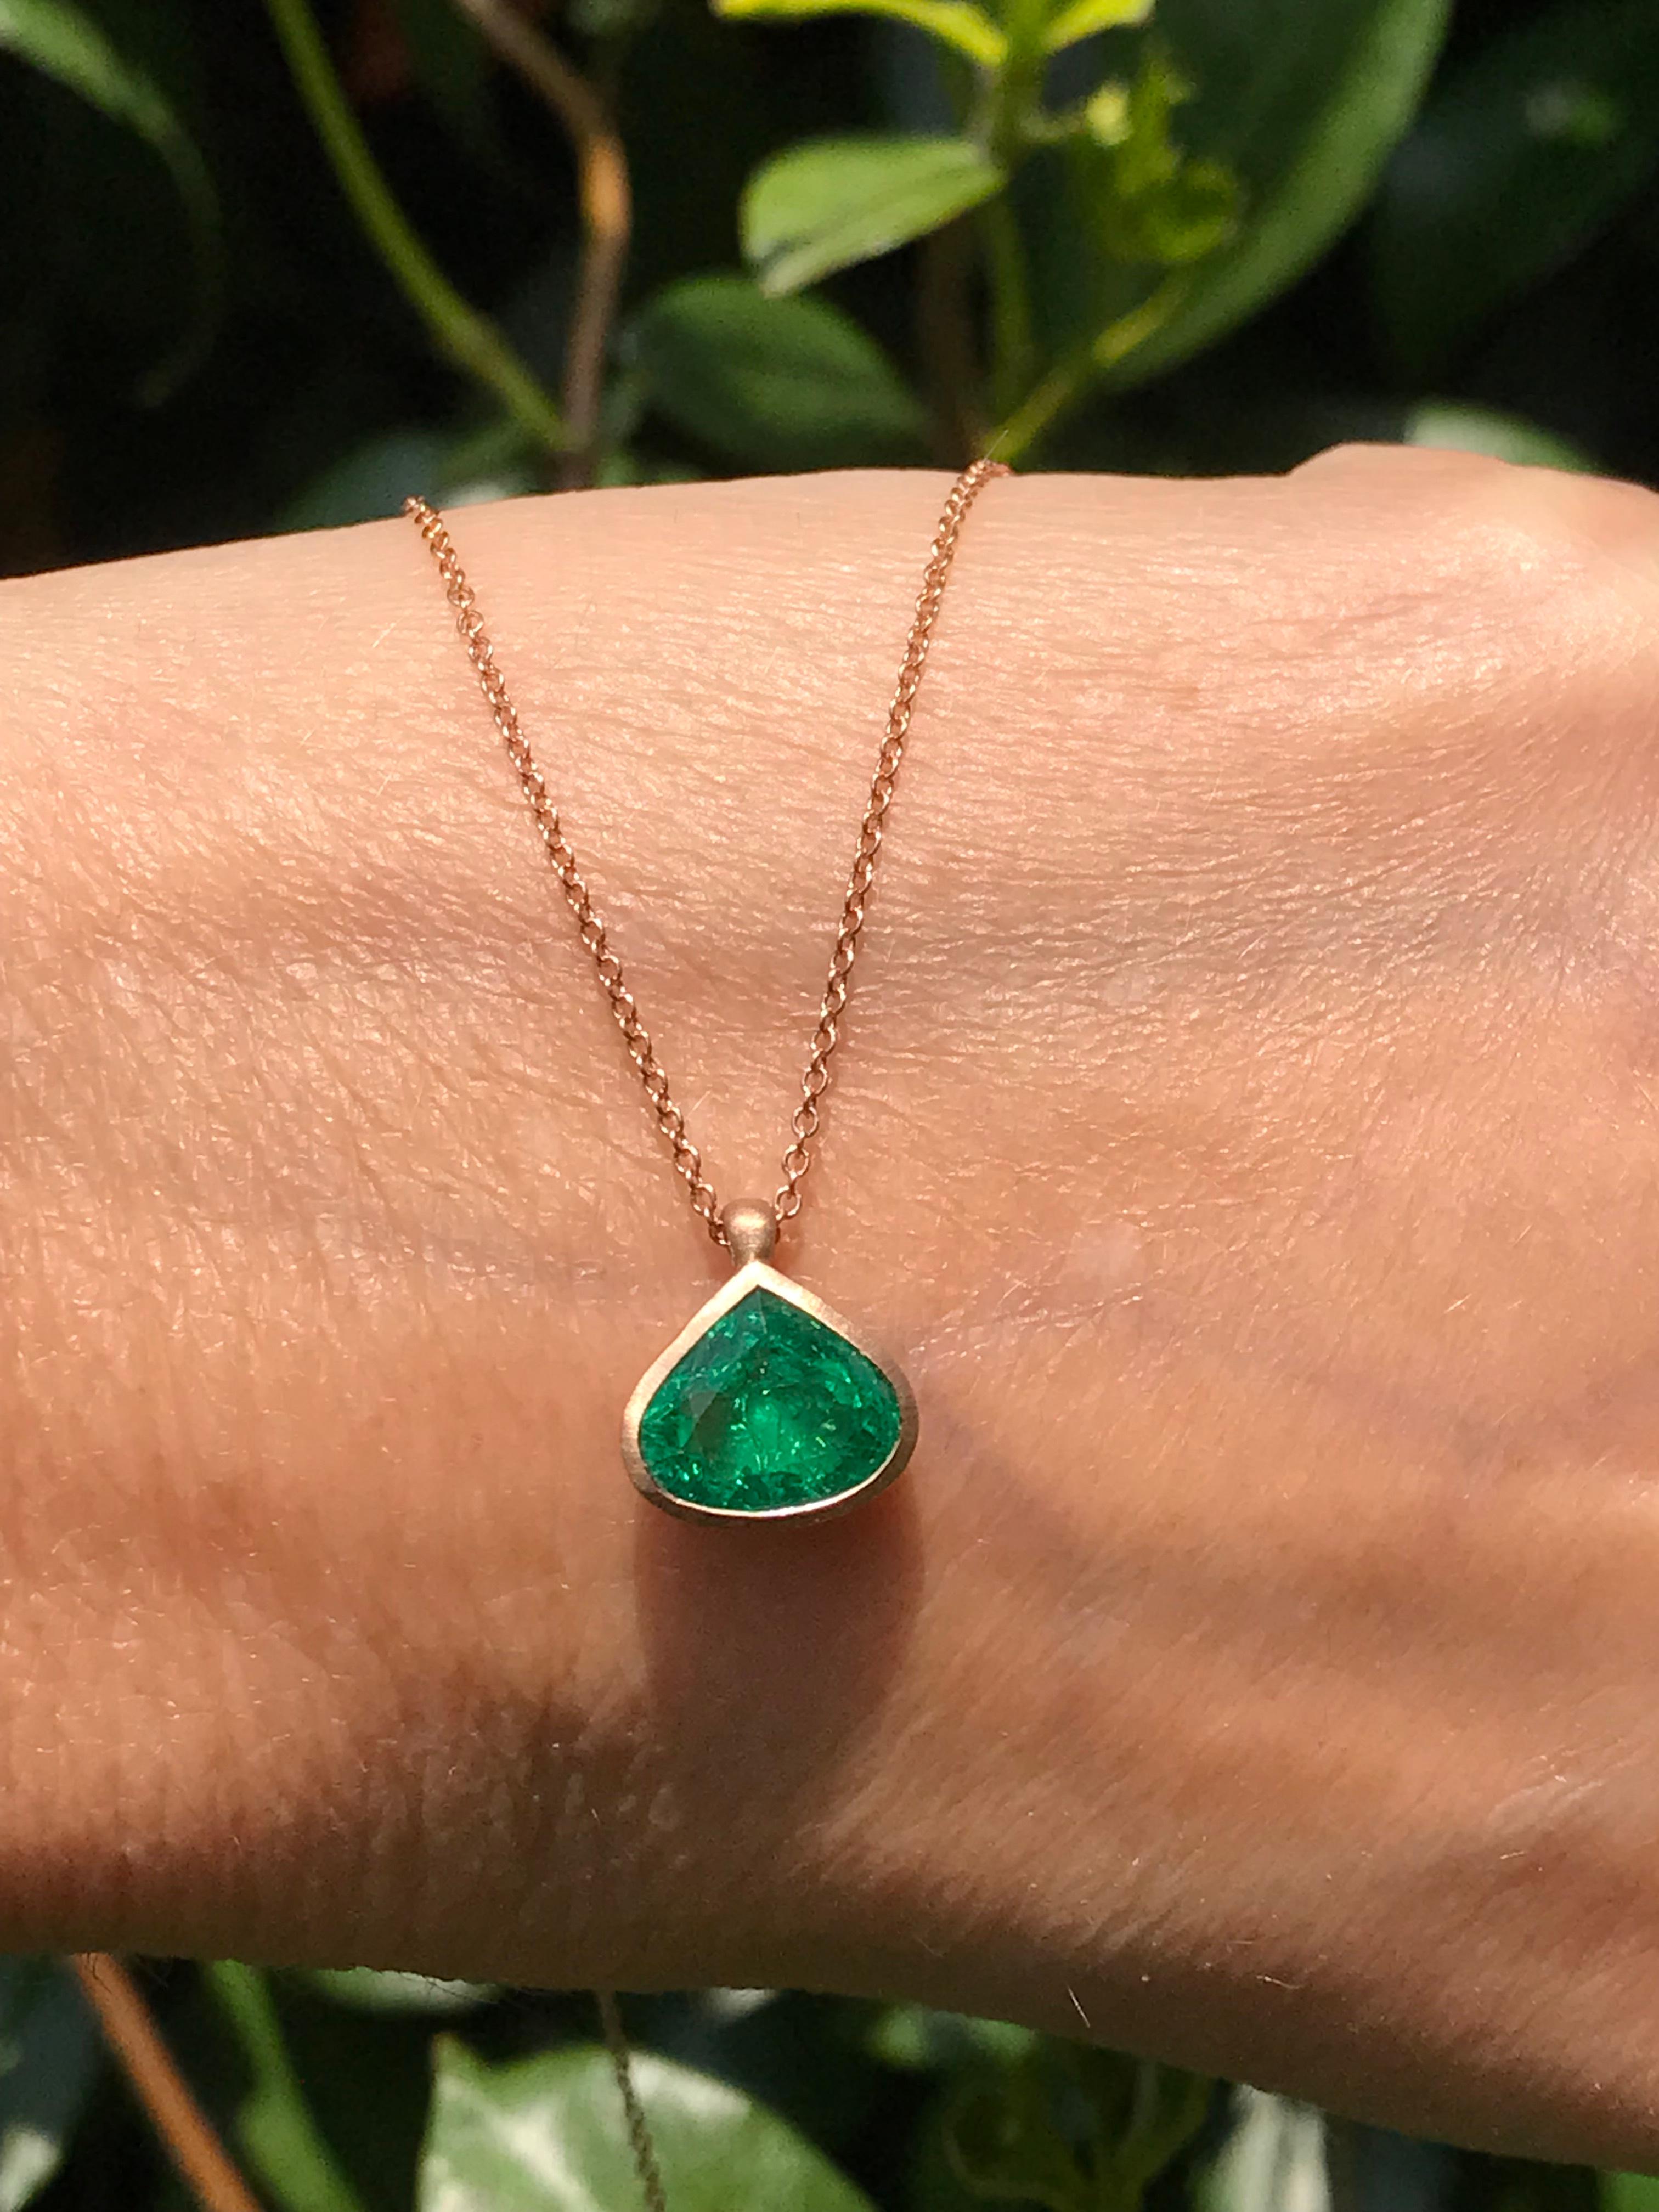 Dalben design  18k rose gold satin finishing pendant  with a bezel-set  faceted drop shape Emerald weight 2,32 carat. 
drop pendant dimension : 
width 10,8 mm
height 9,6 mm
Chain length 44 cm ( 17,3 inch ) resizable
The necklace has been designed